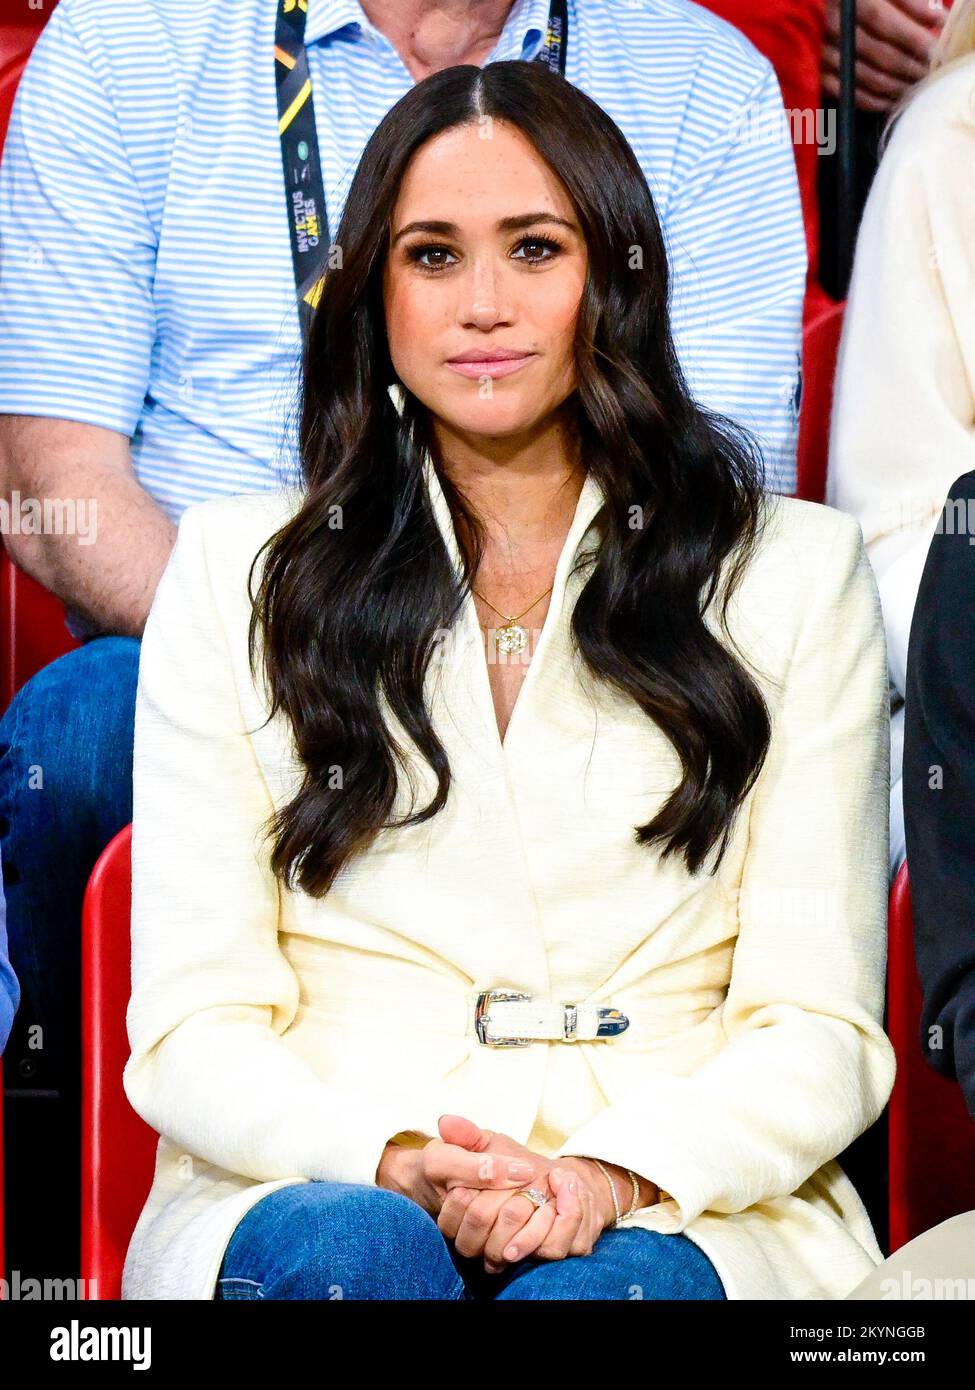 https://c8.alamy.com/comp/2KYNGGB/prince-harry-and-meghan-drop-bombshell-netflix-trailer-with-hint-of-fresh-attacks-on-royal-family-and-with-duchess-seen-sobbing-the-duke-of-sussex-living-in-the-united-states-with-his-wife-meghan-markle-duchess-of-sussex-and-their-two-children-archie-harrison-mountbatten-windsor-and-daughter-lilibet-diana-mountbatten-windsor-photo-by-dppasipa-usa-2KYNGGB.jpg